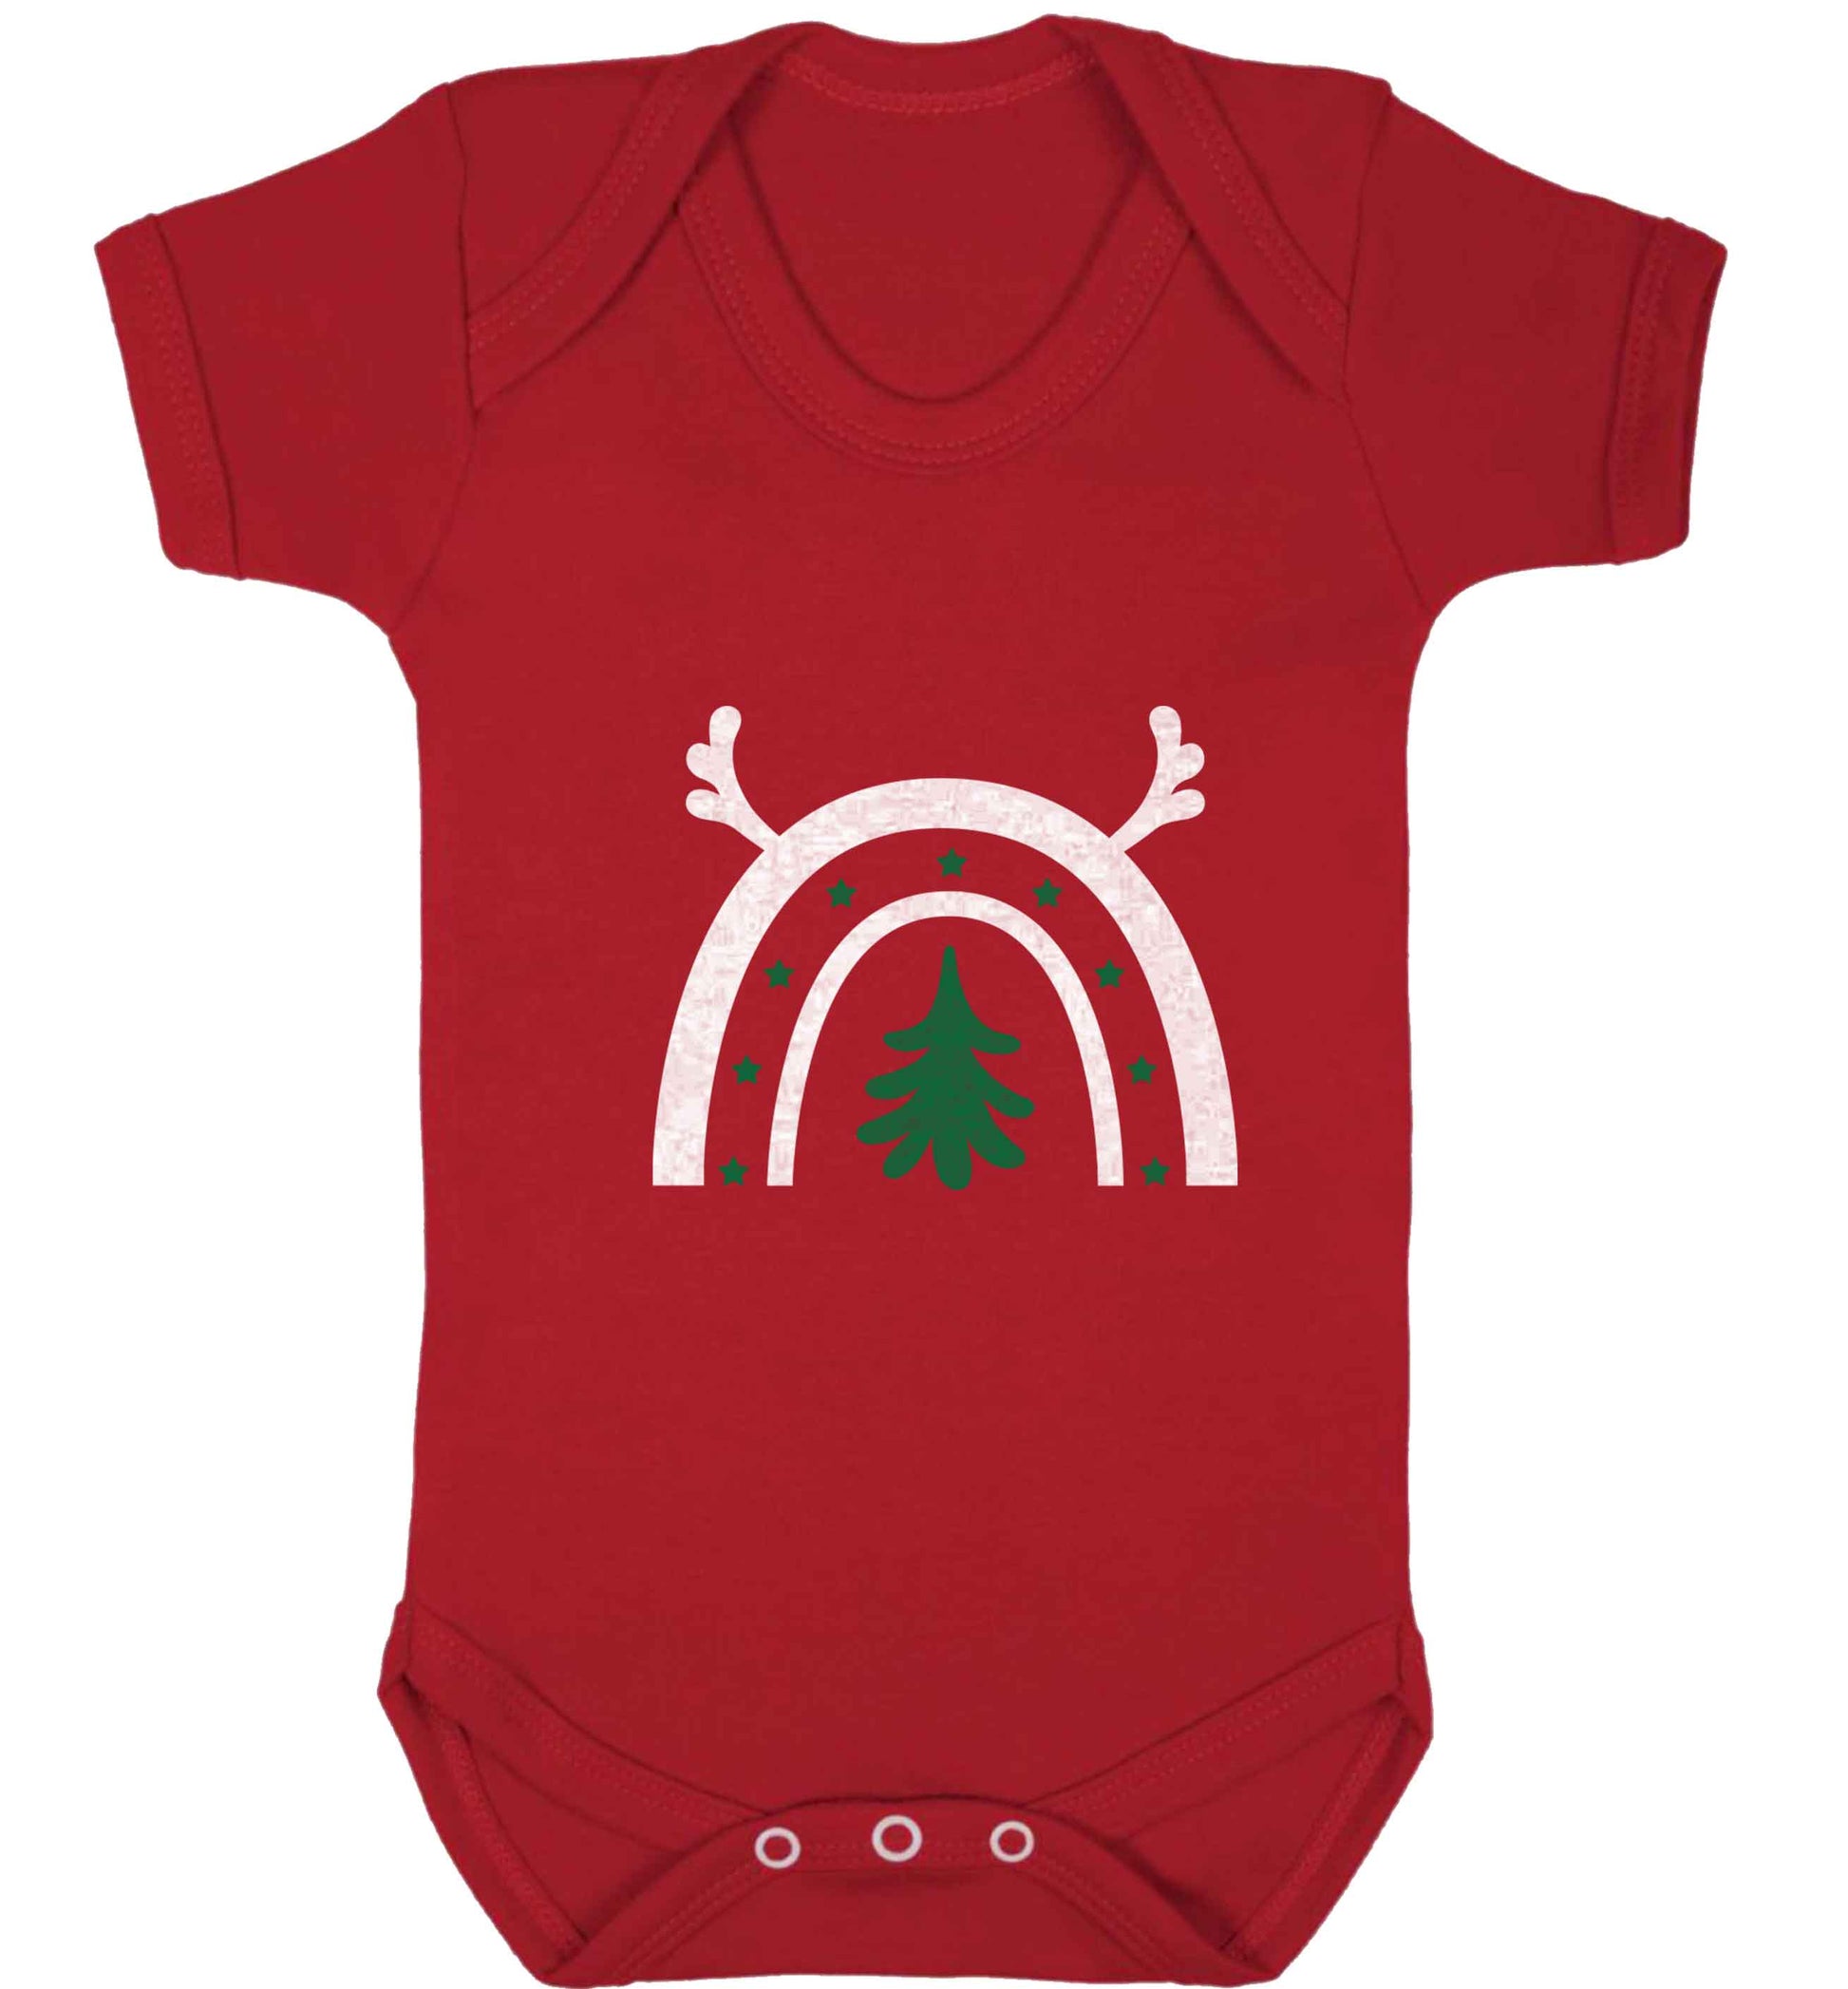 Christmas rainbow baby vest red 18-24 months